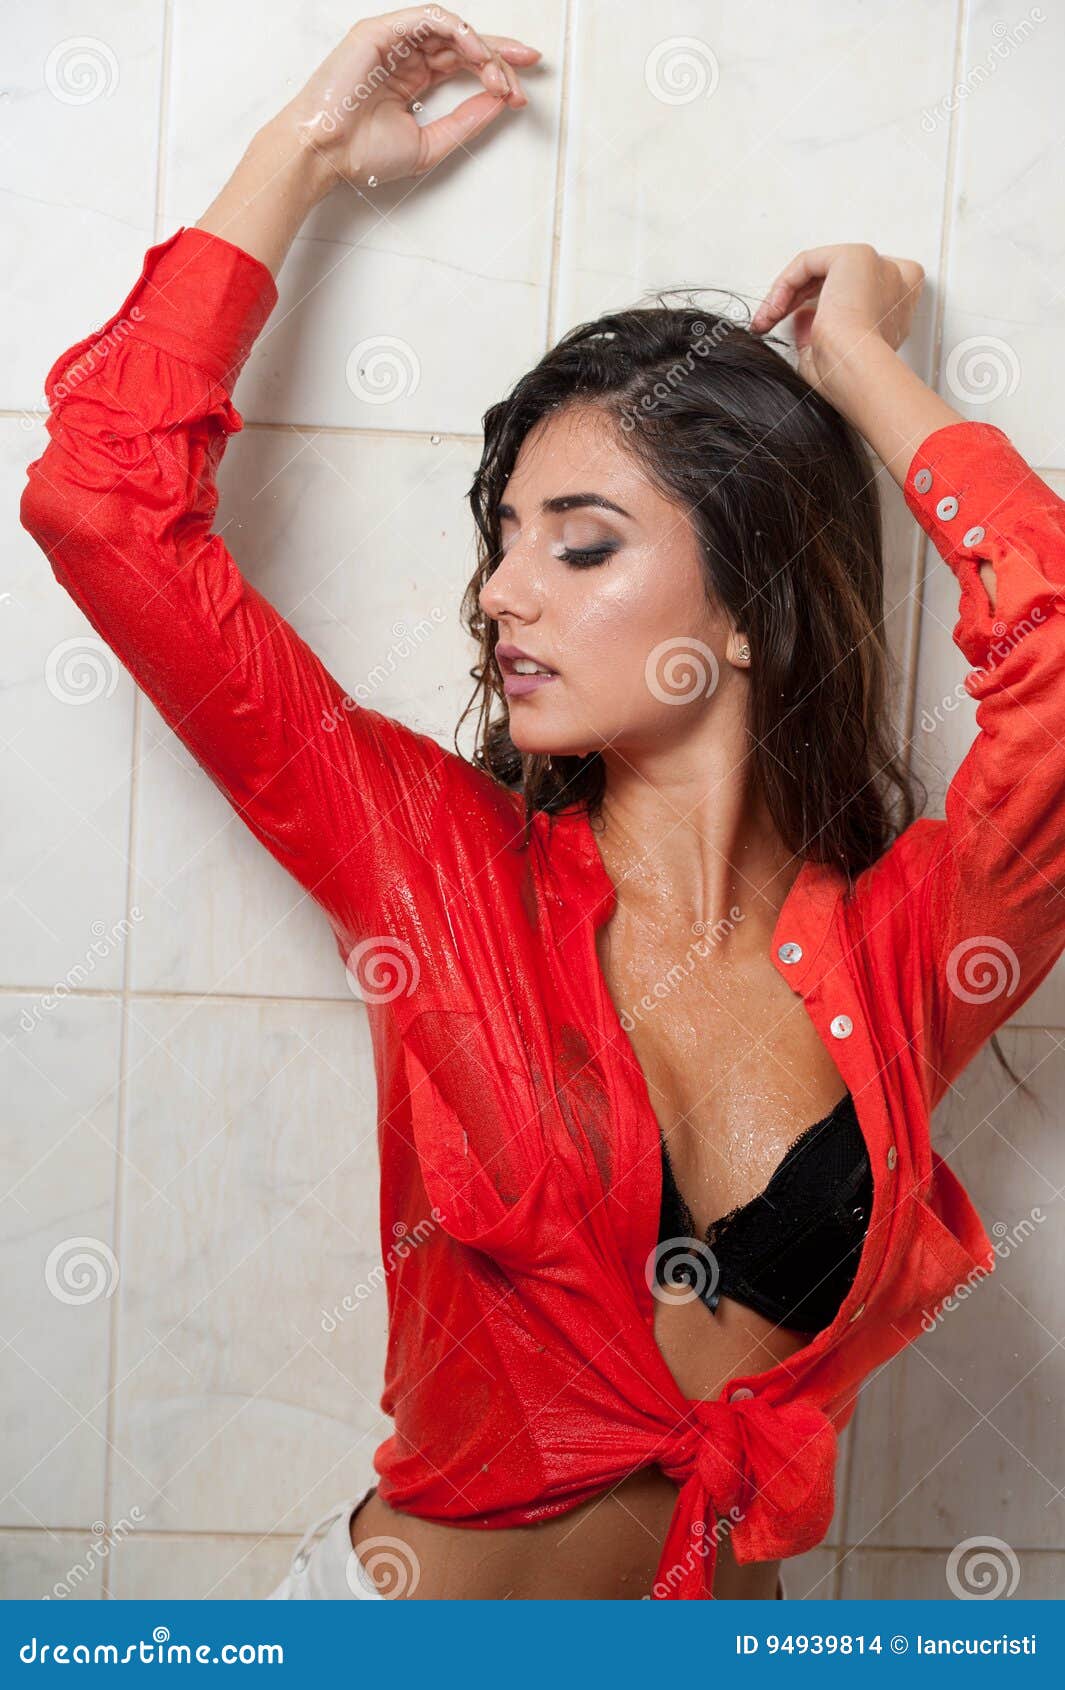 Cute Brunette Woman With Perfect Body Posing In Erotic Pose Under Shower With Wet Hair And